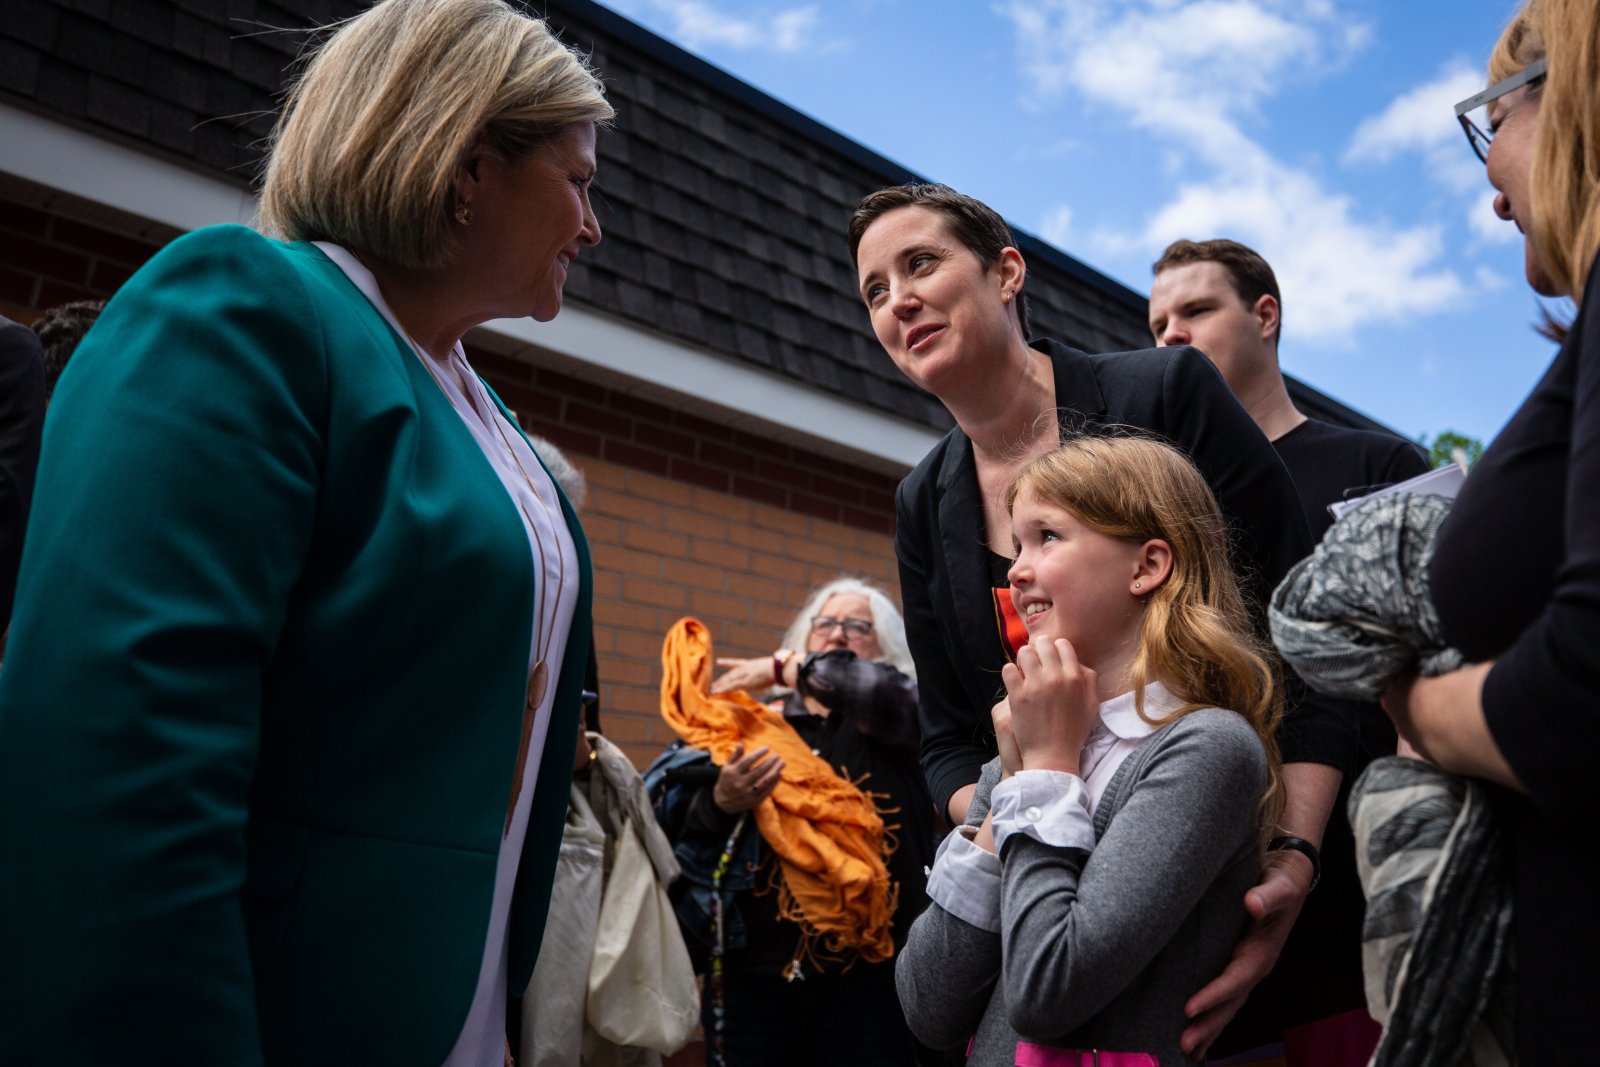 7 year old Mira Pasma-Helleman is with her mother, candidate for the New Democratic Party of Ontario Chandra Pasma for Ottawa West-Nepean, for an election campaign rally with the party's leader, Andrea Horwath, to bring support to the local candidates, at